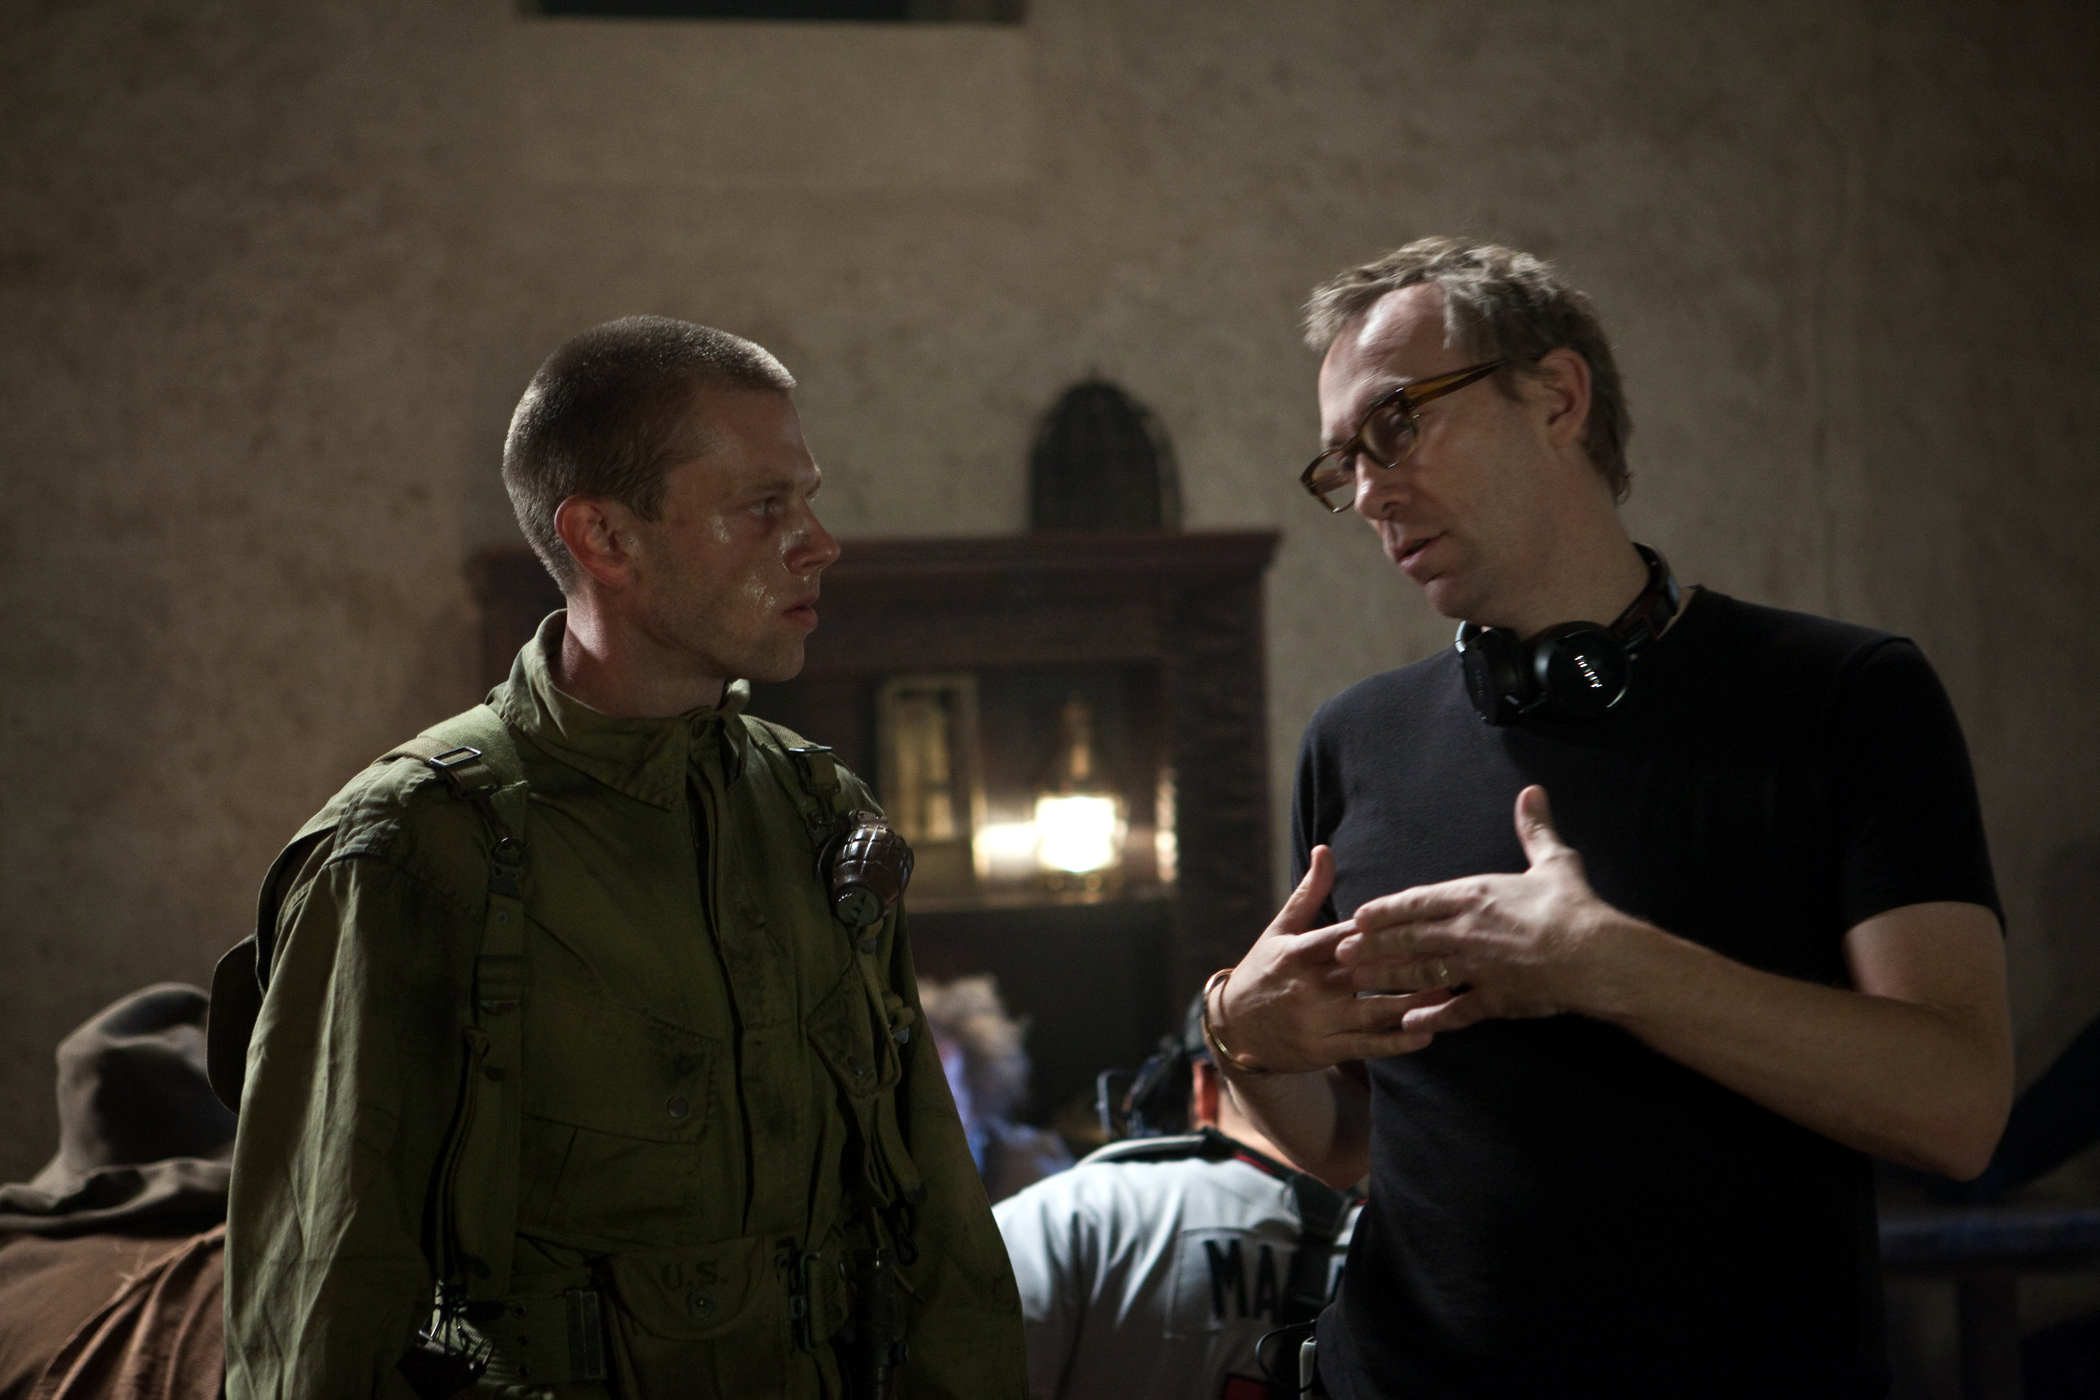 (From left: George Jonson and Director Simon McQuoid) From Sony Playstation 3's tribute 